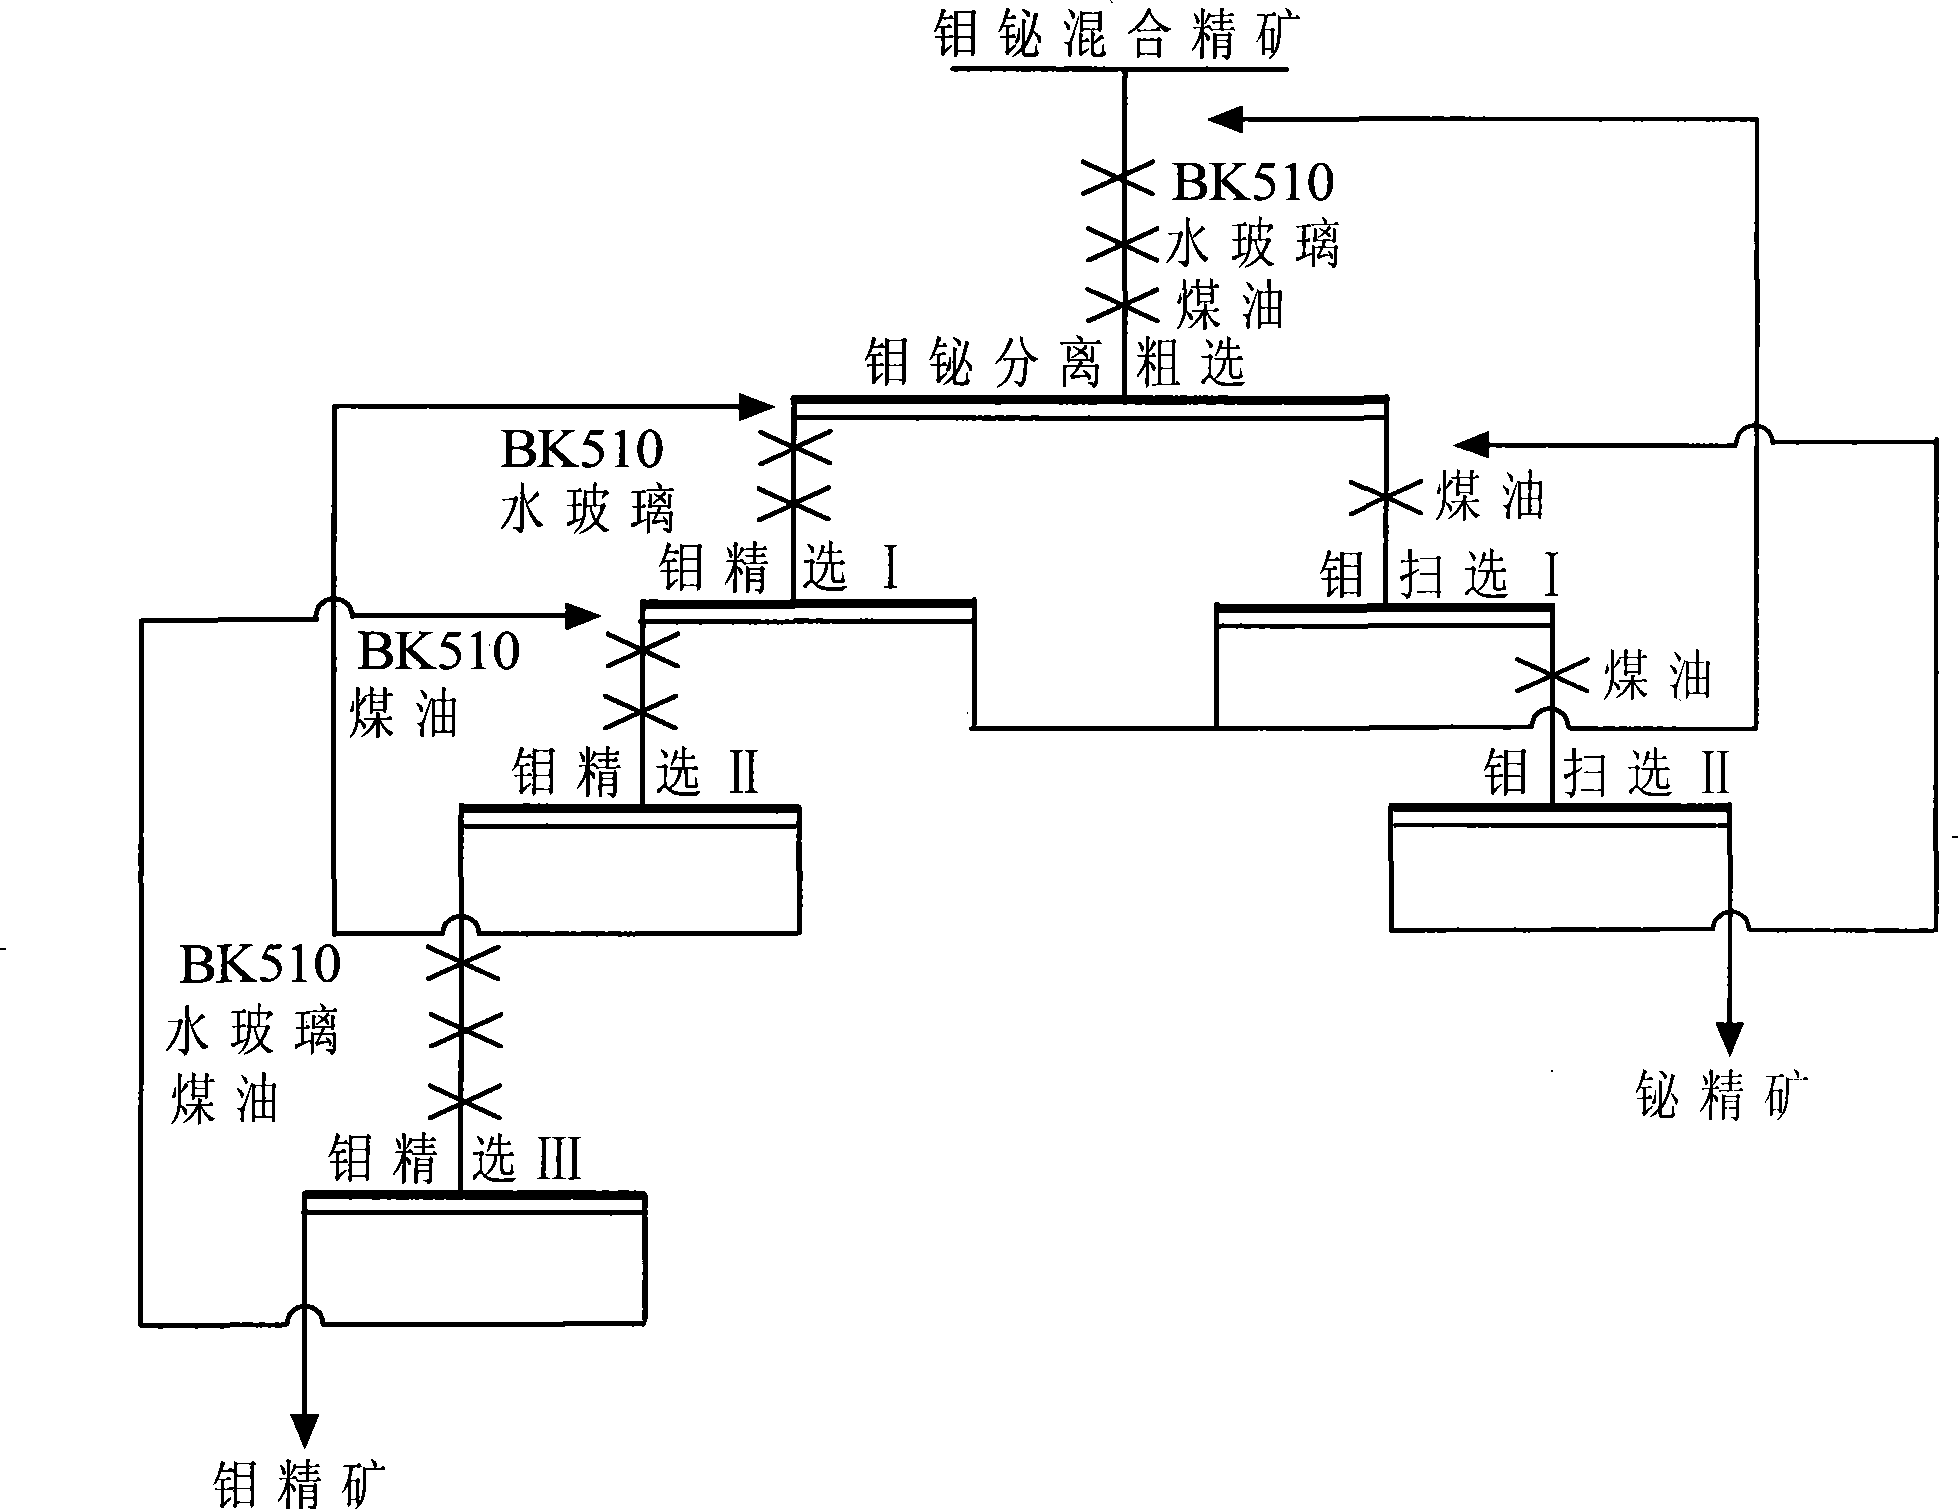 Process for the separation of molybdenum-bismuth mineral